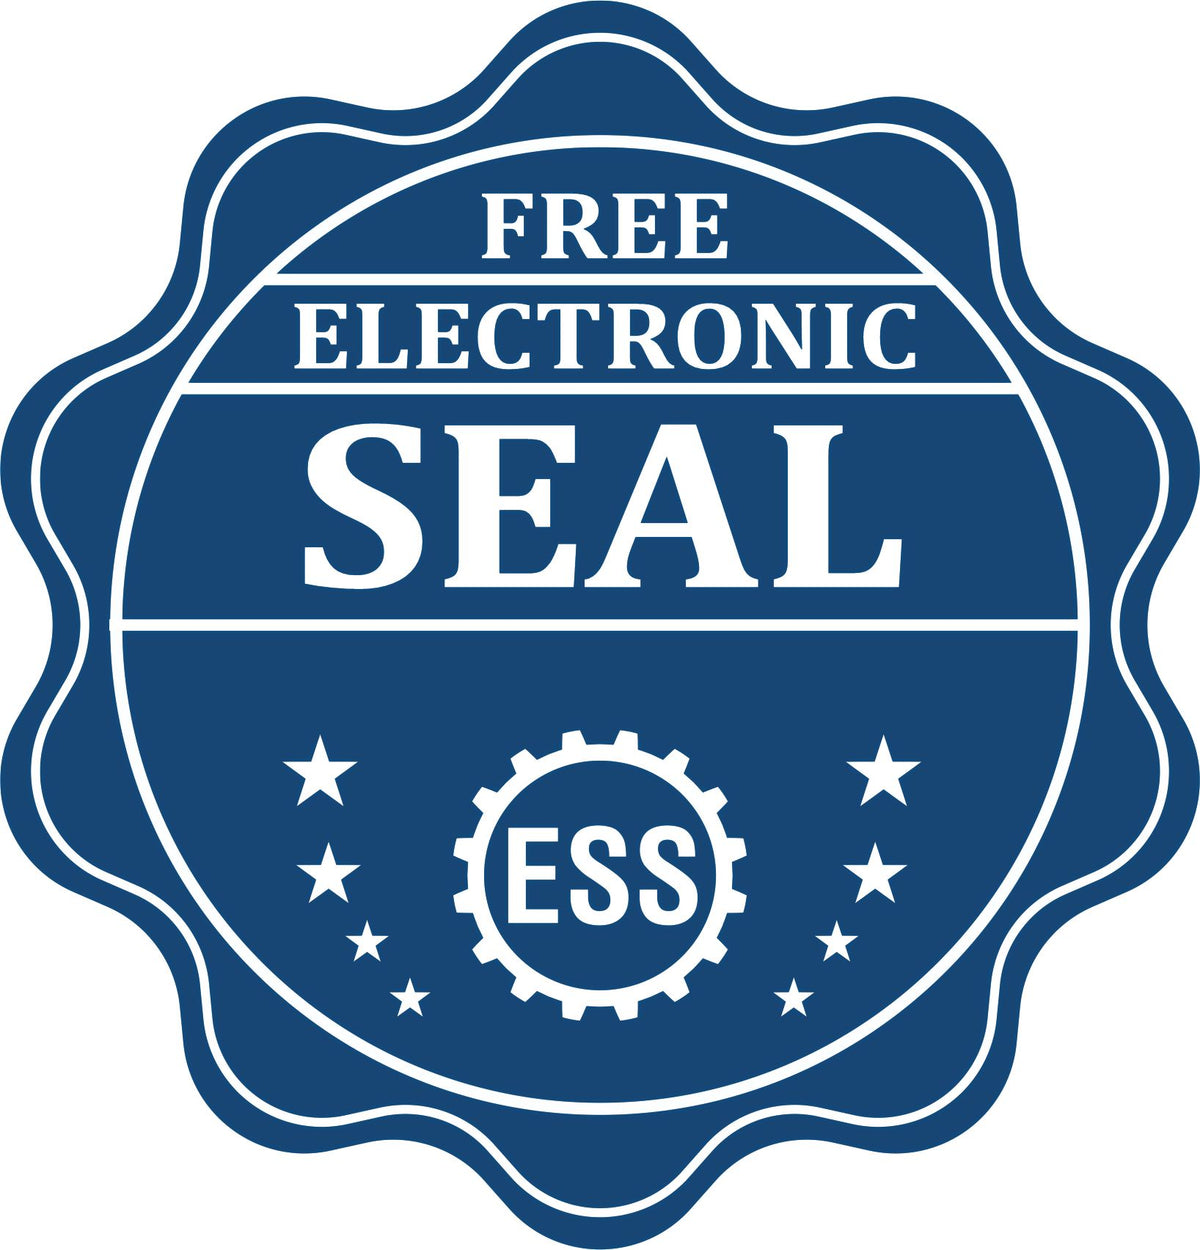 A badge showing a free electronic seal for the Hybrid North Dakota Engineer Seal with stars and the ESS gear on the emblem.